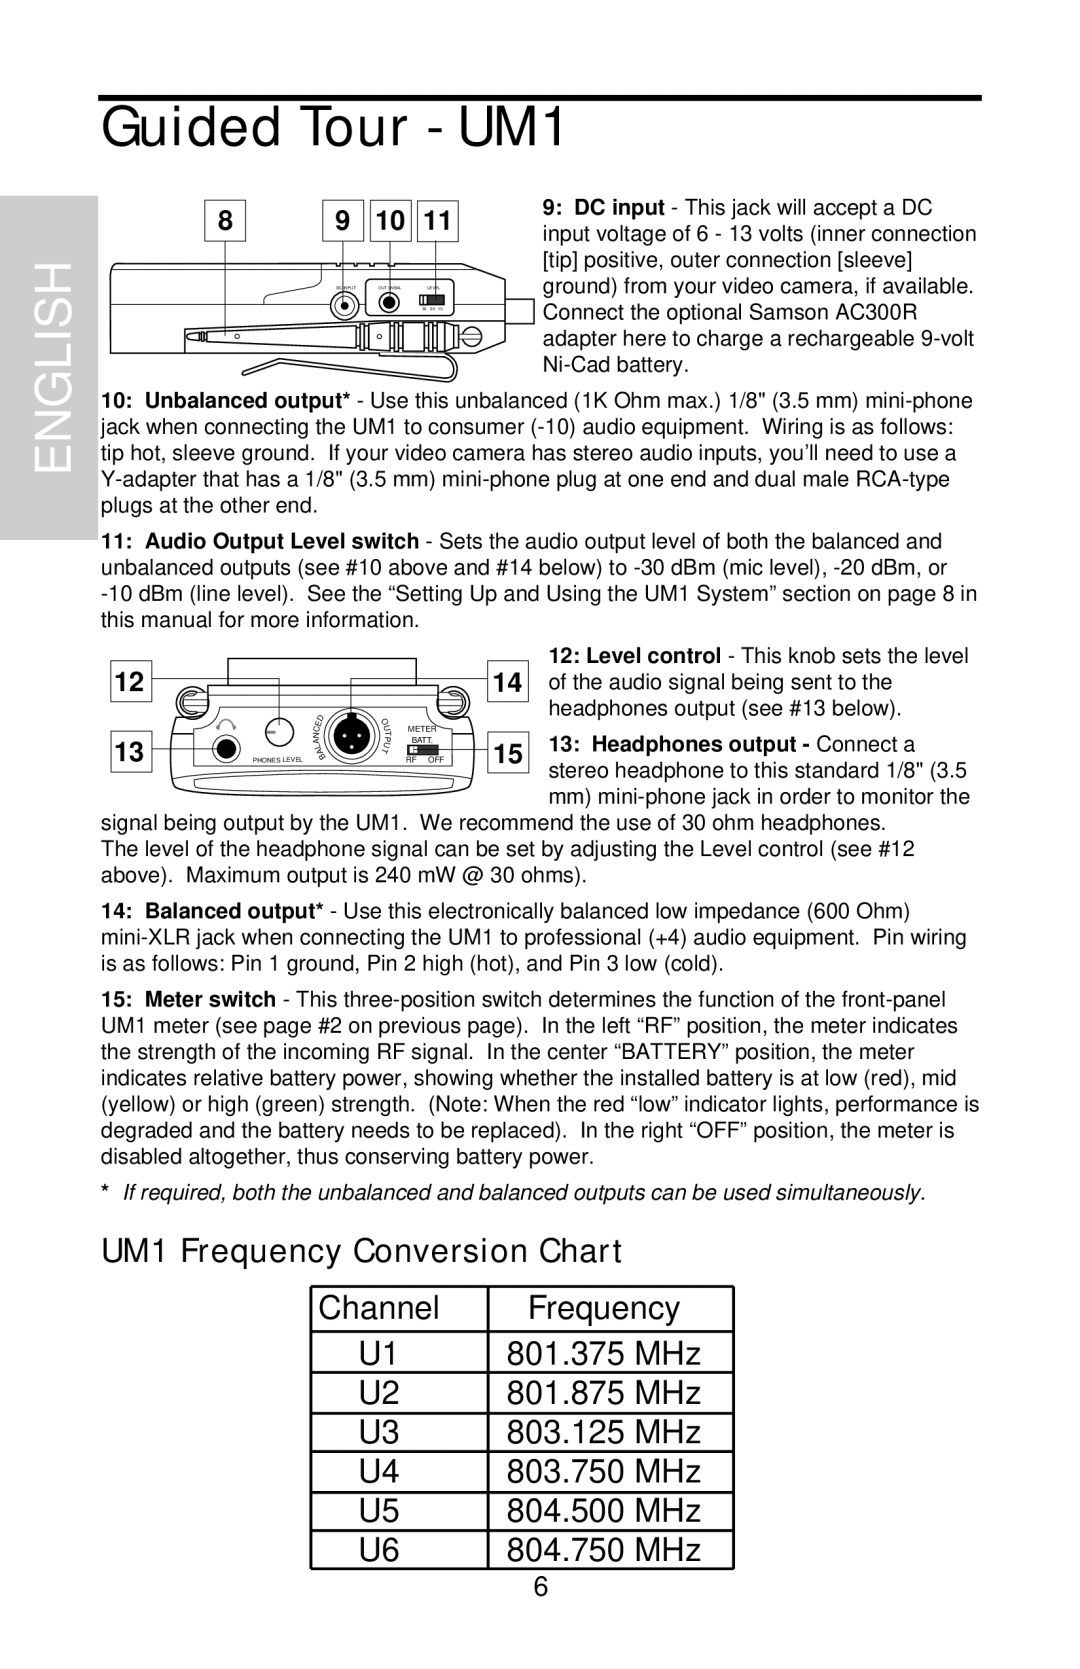 Samson UHF Series One owner manual UM1 Frequency Conversion Chart, Guided Tour - UM1, English 